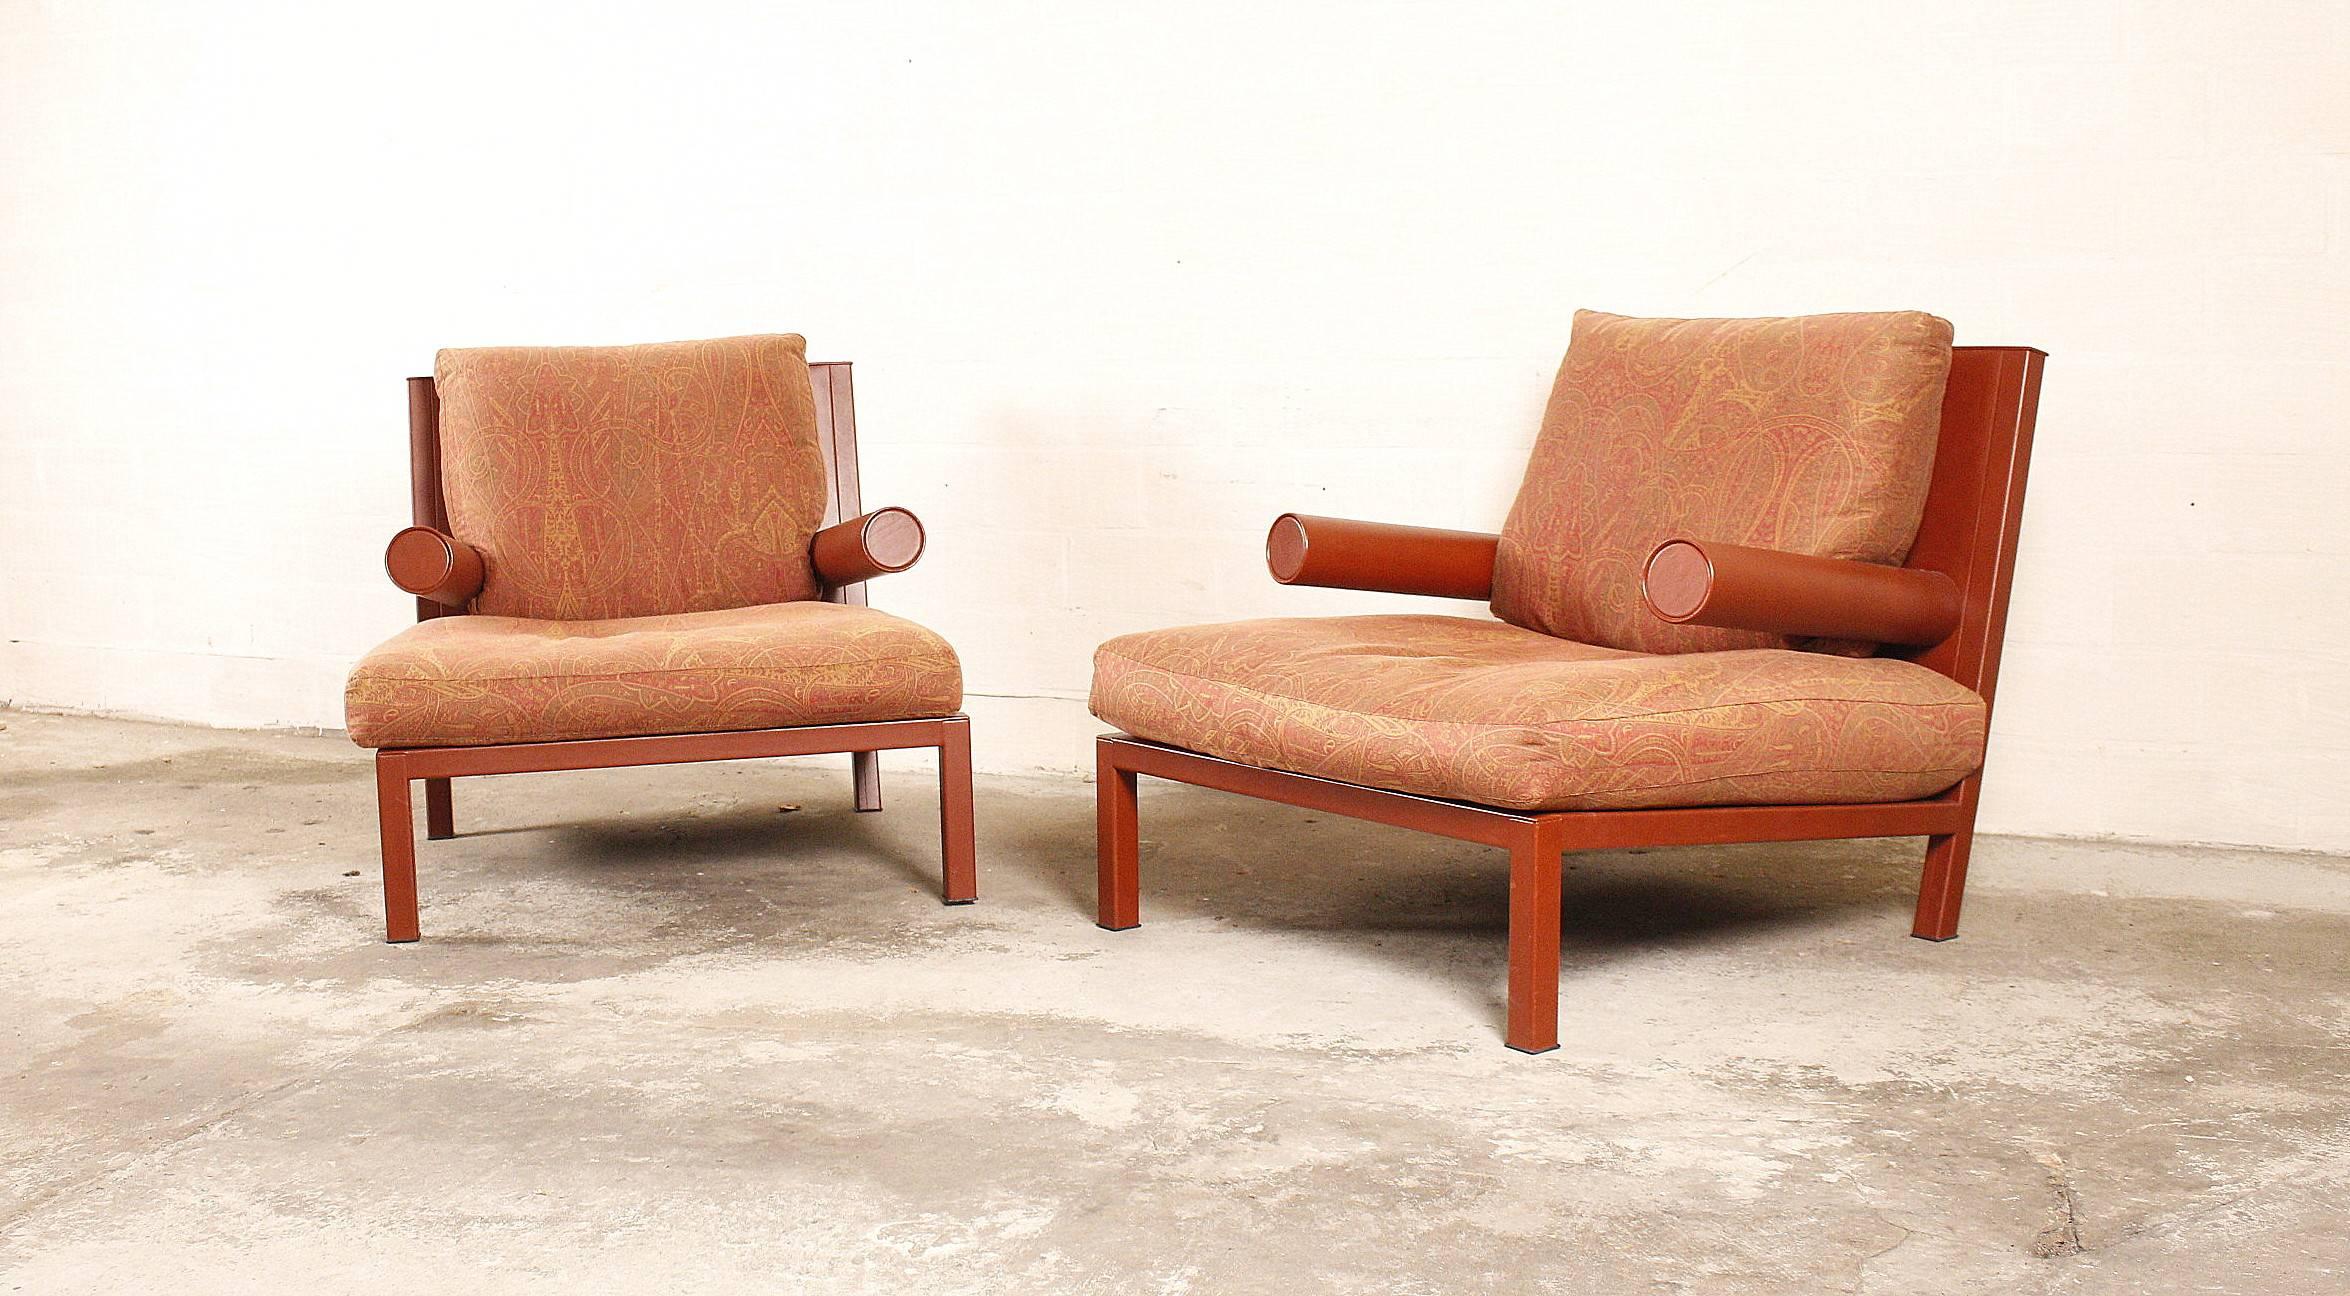 Large pair of armchairs 'Baisity' by Antonio Citterio for B&B with cushions in fabric.
Frame covered in dark red leather.
The seat was designed in 1986 by Antonio Citterio and won a year later the compasso d'oro with this design.